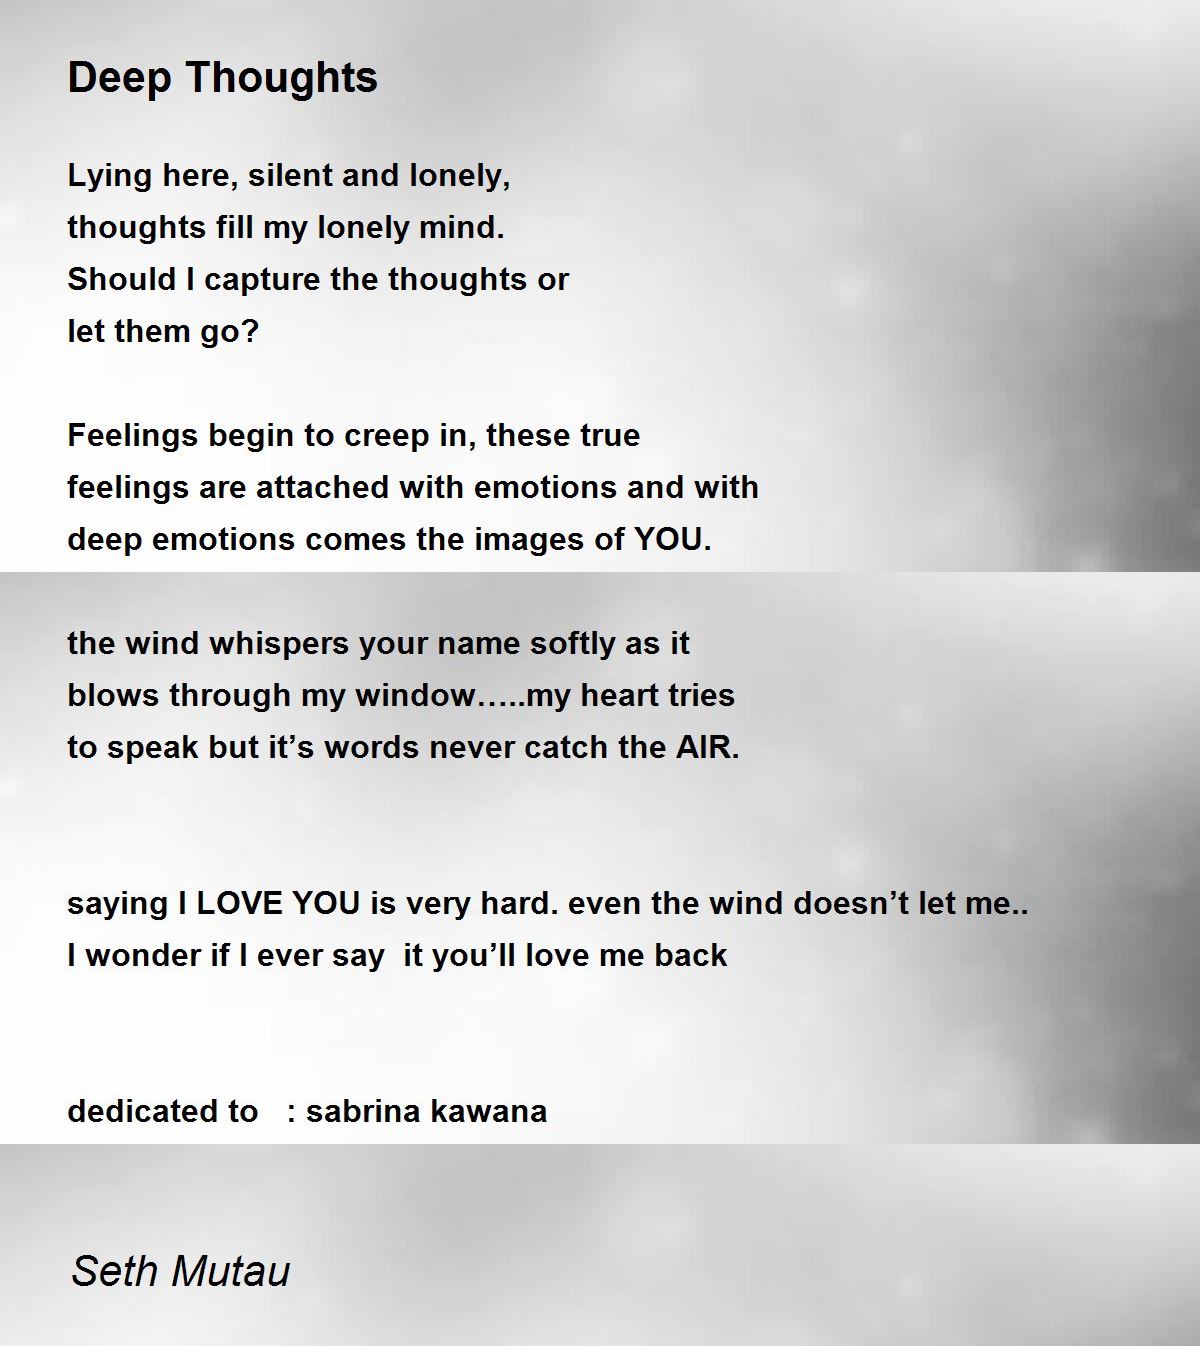 Deep Thoughts - Deep Thoughts Poem by Seth Mutau